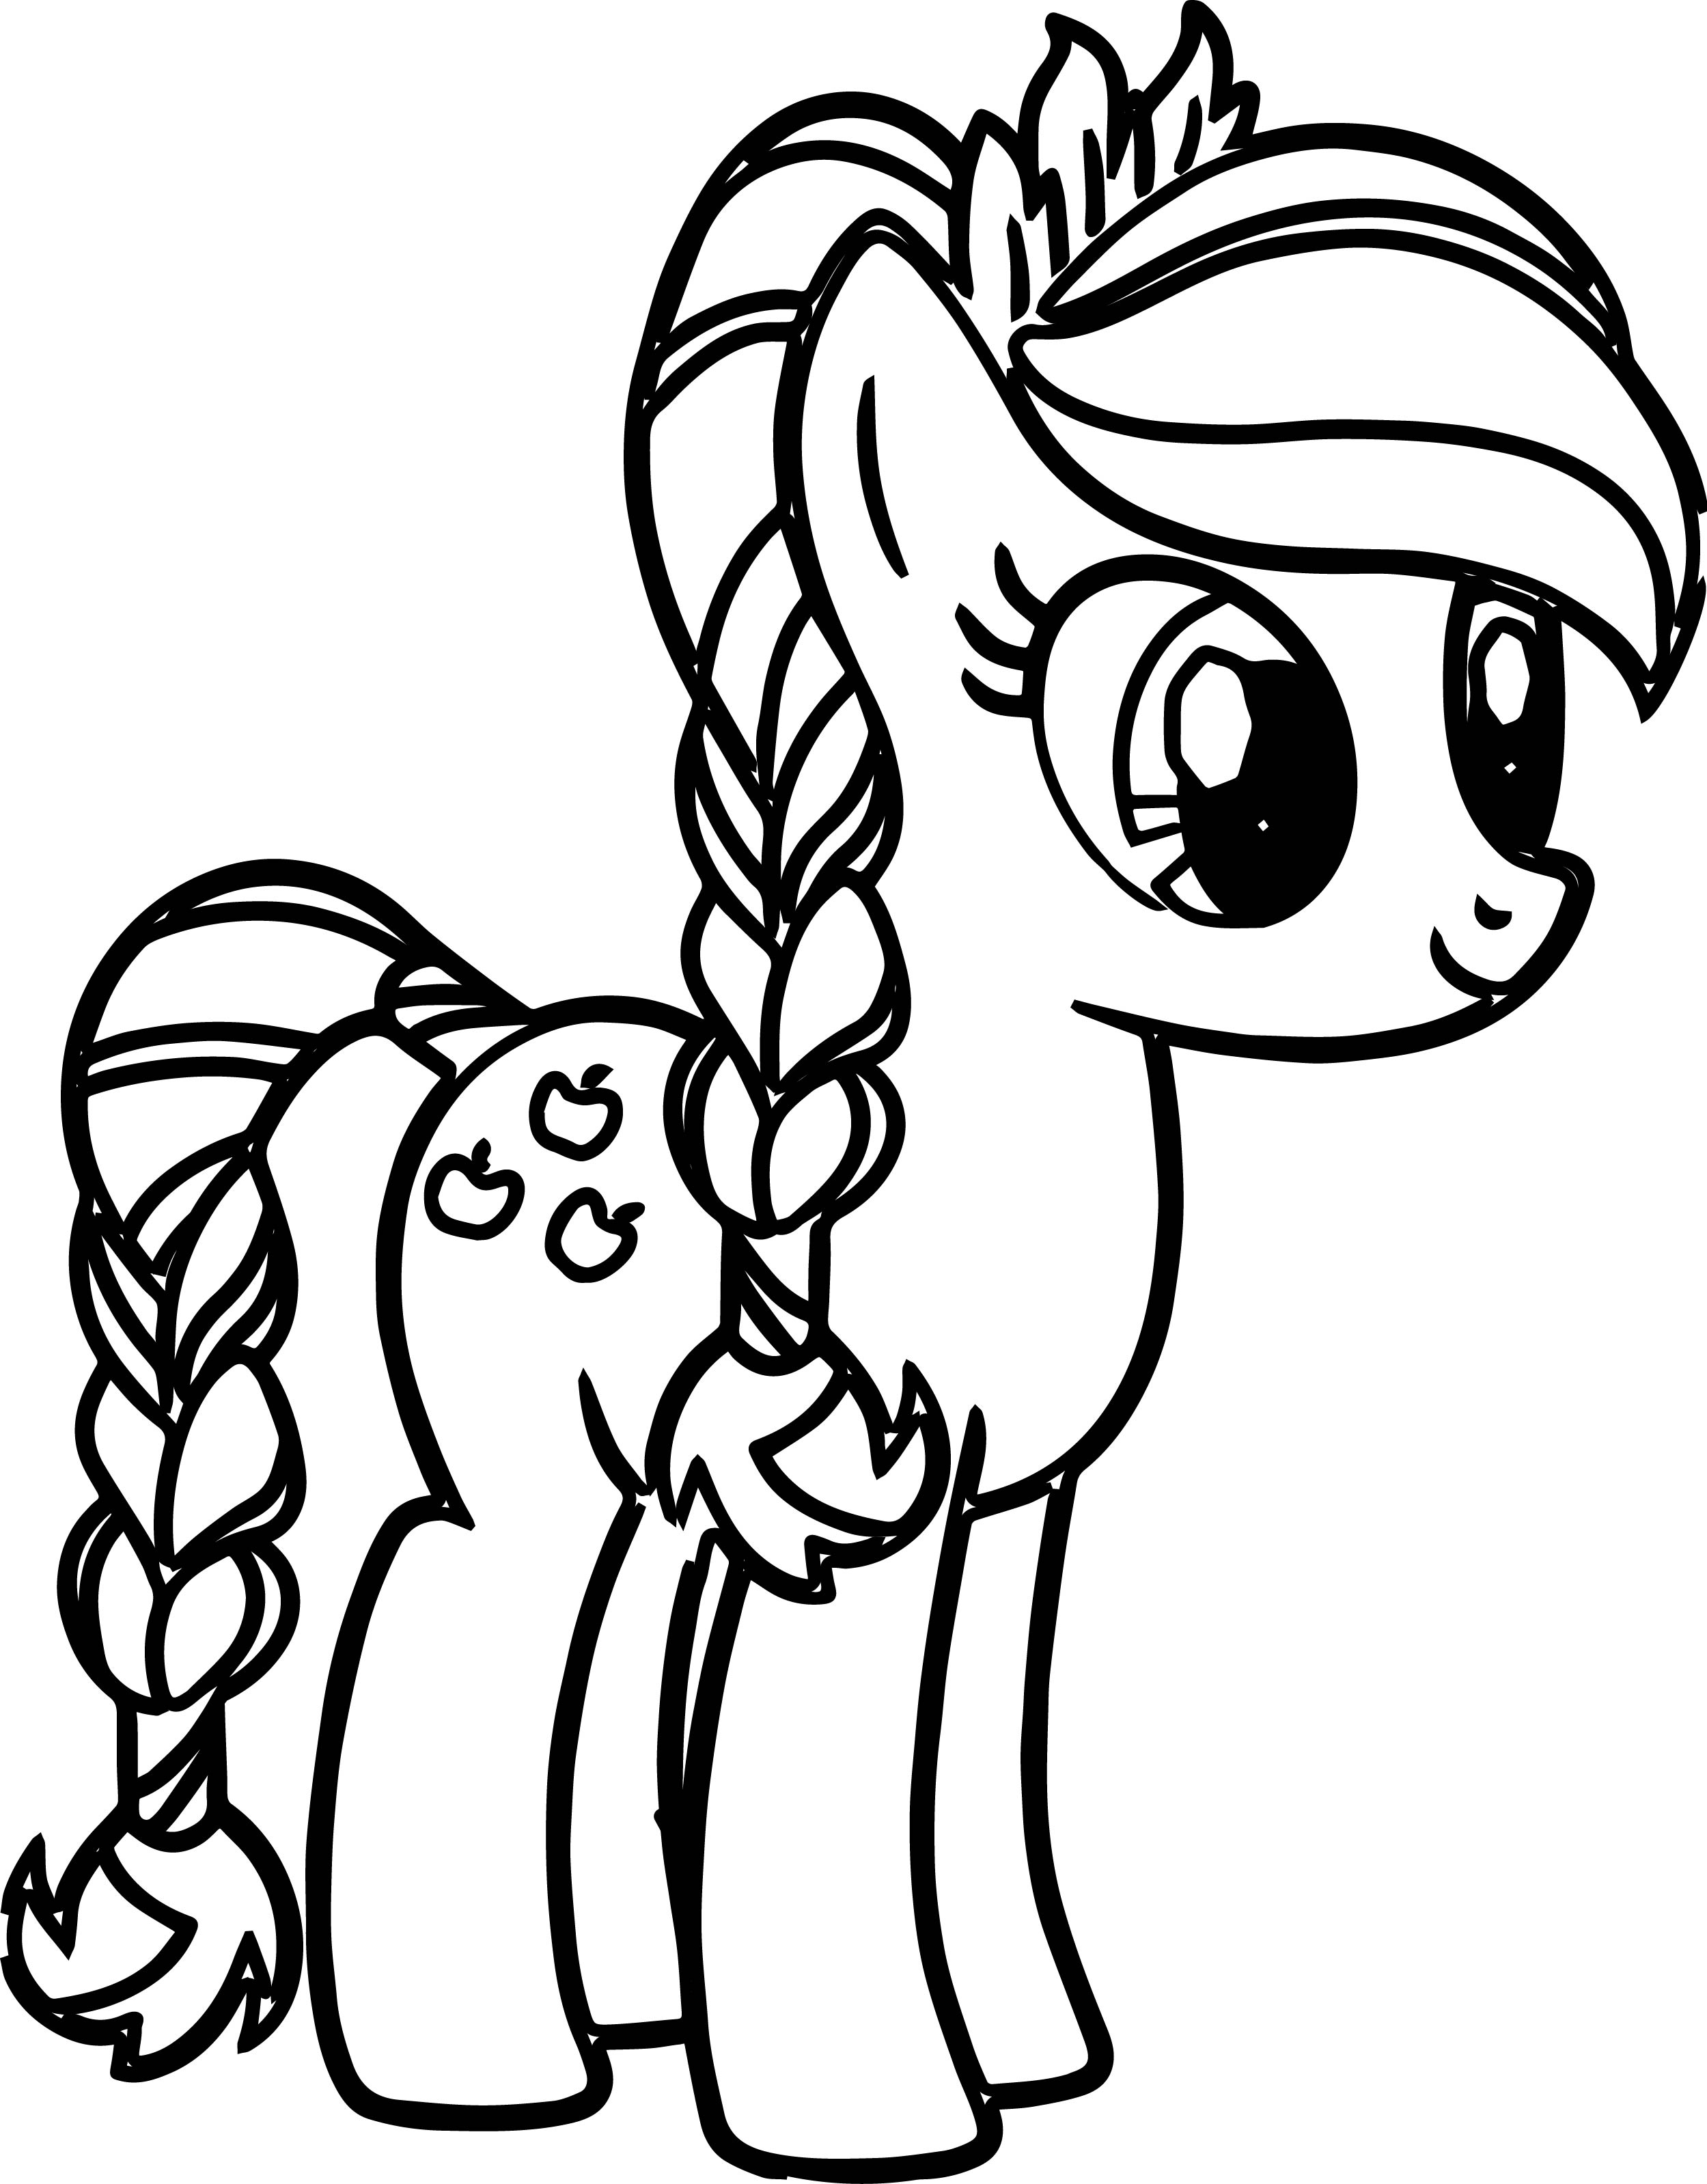 My Pretty Pony Coloring Pages at GetDrawings.com | Free for ...